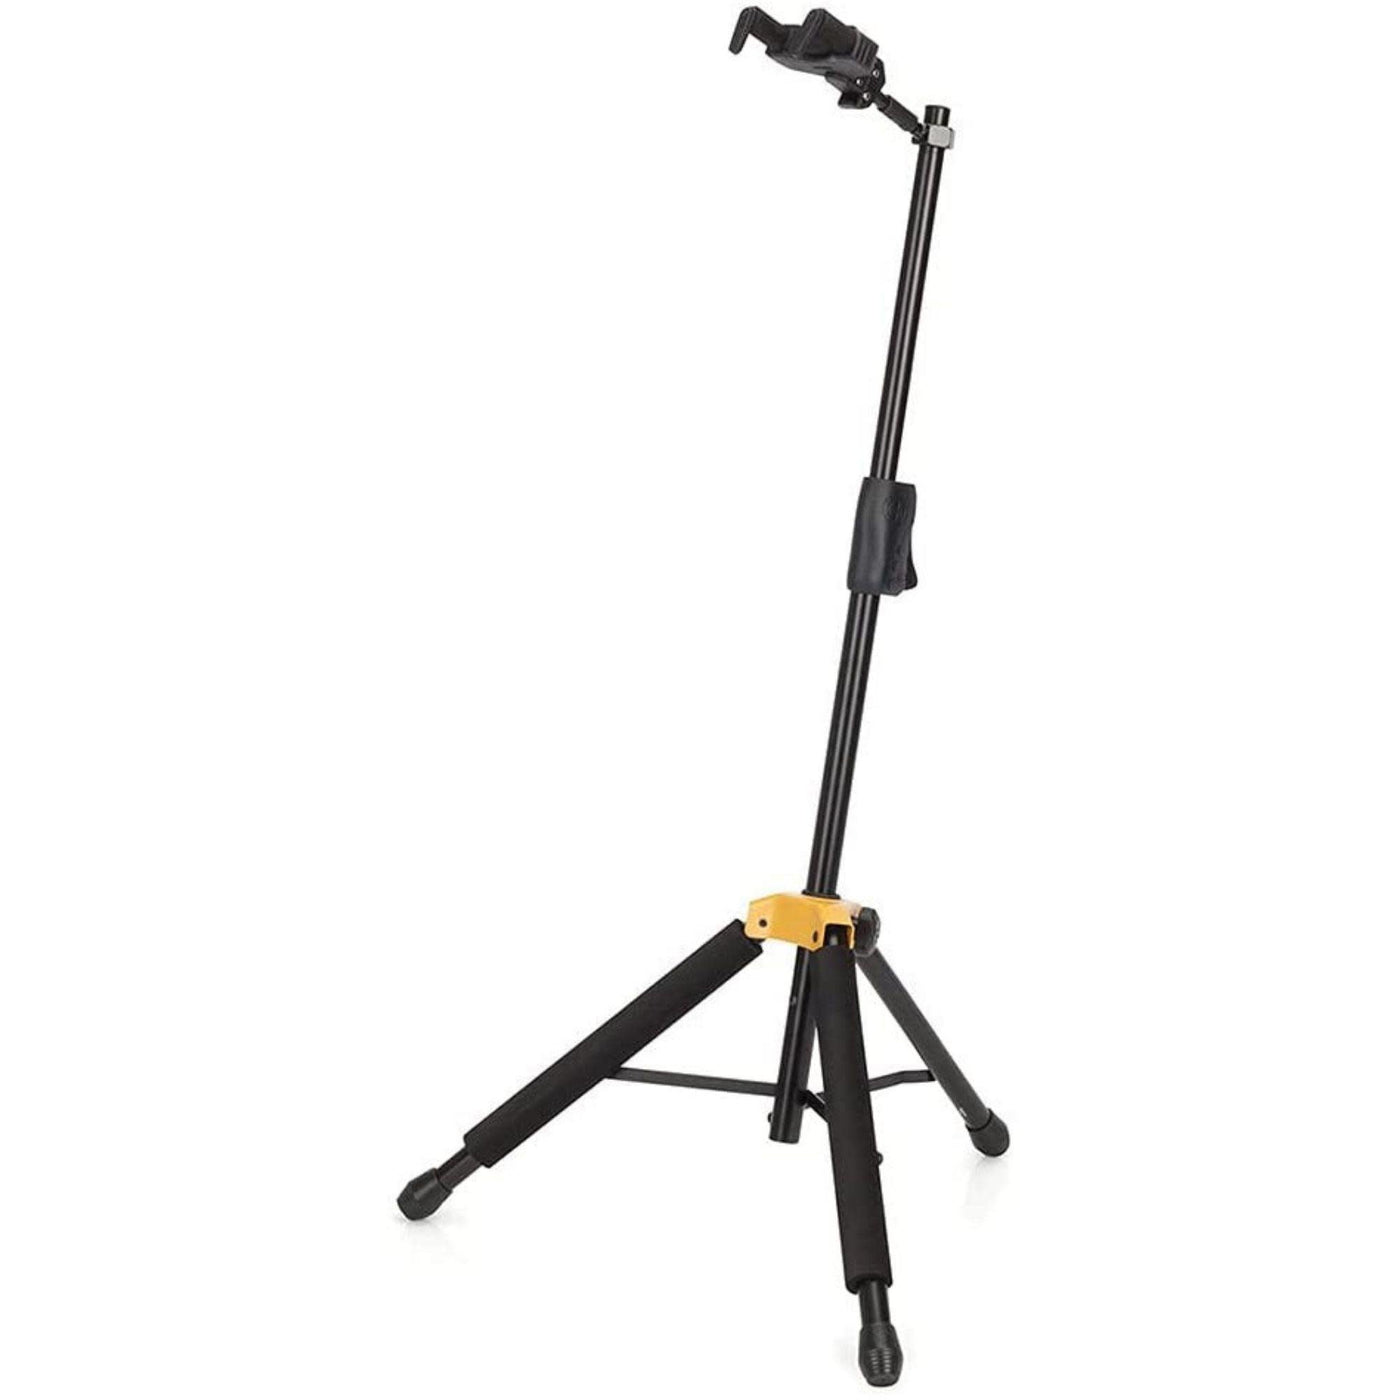 Hercules GS415BPLUS Universal AutoGrip Guitar Stand with Foldable Yoke